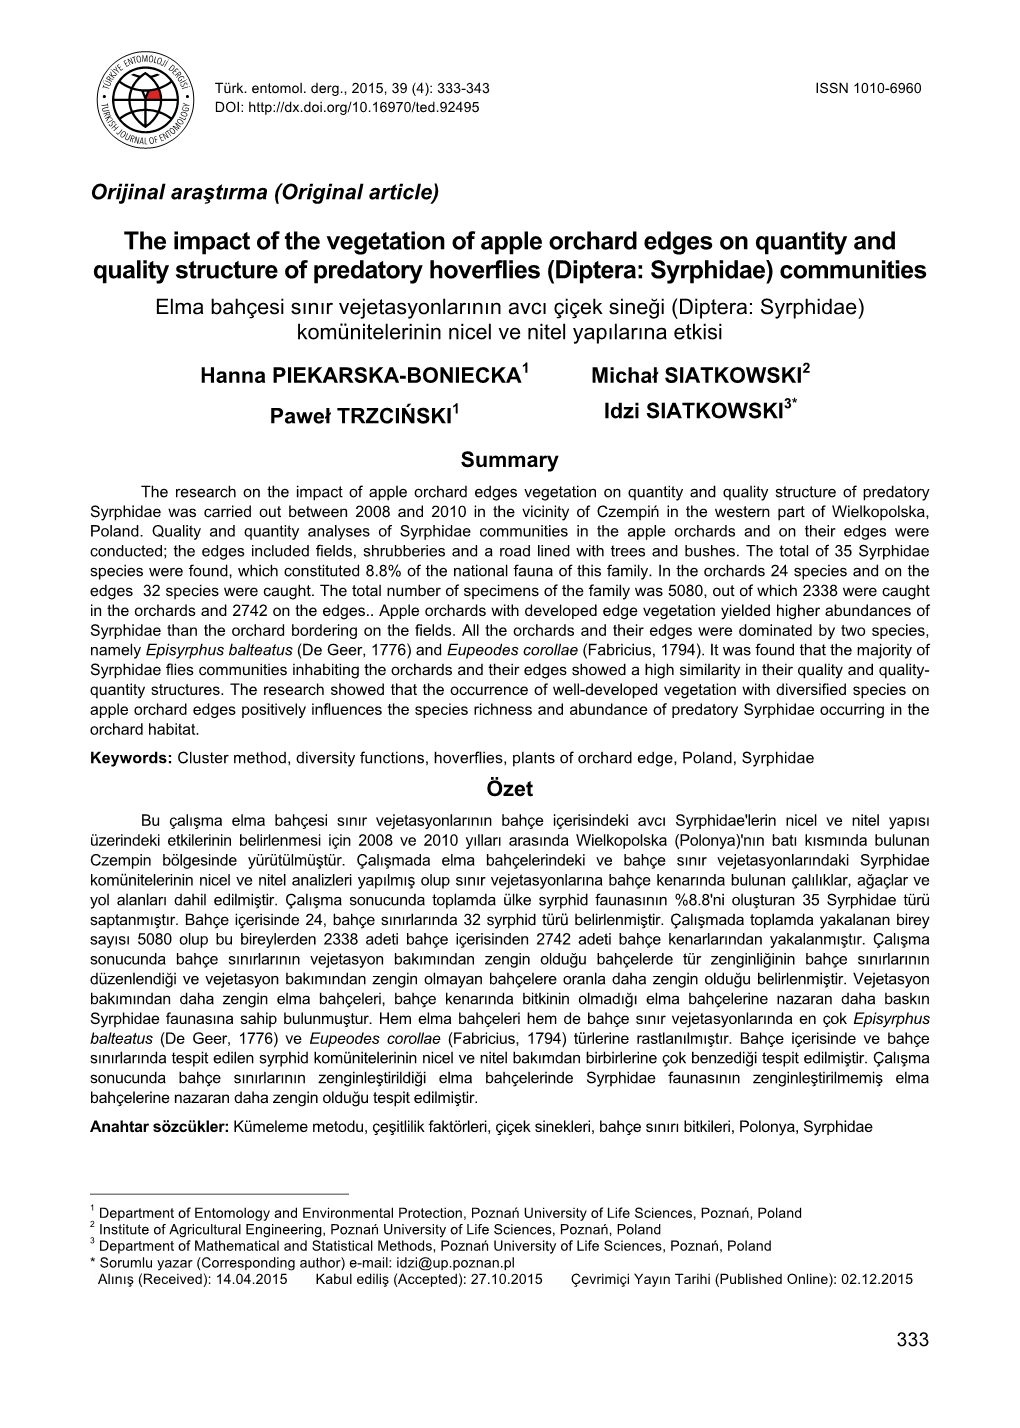 The Impact of the Vegetation of Apple Orchard Edges on Quantity And